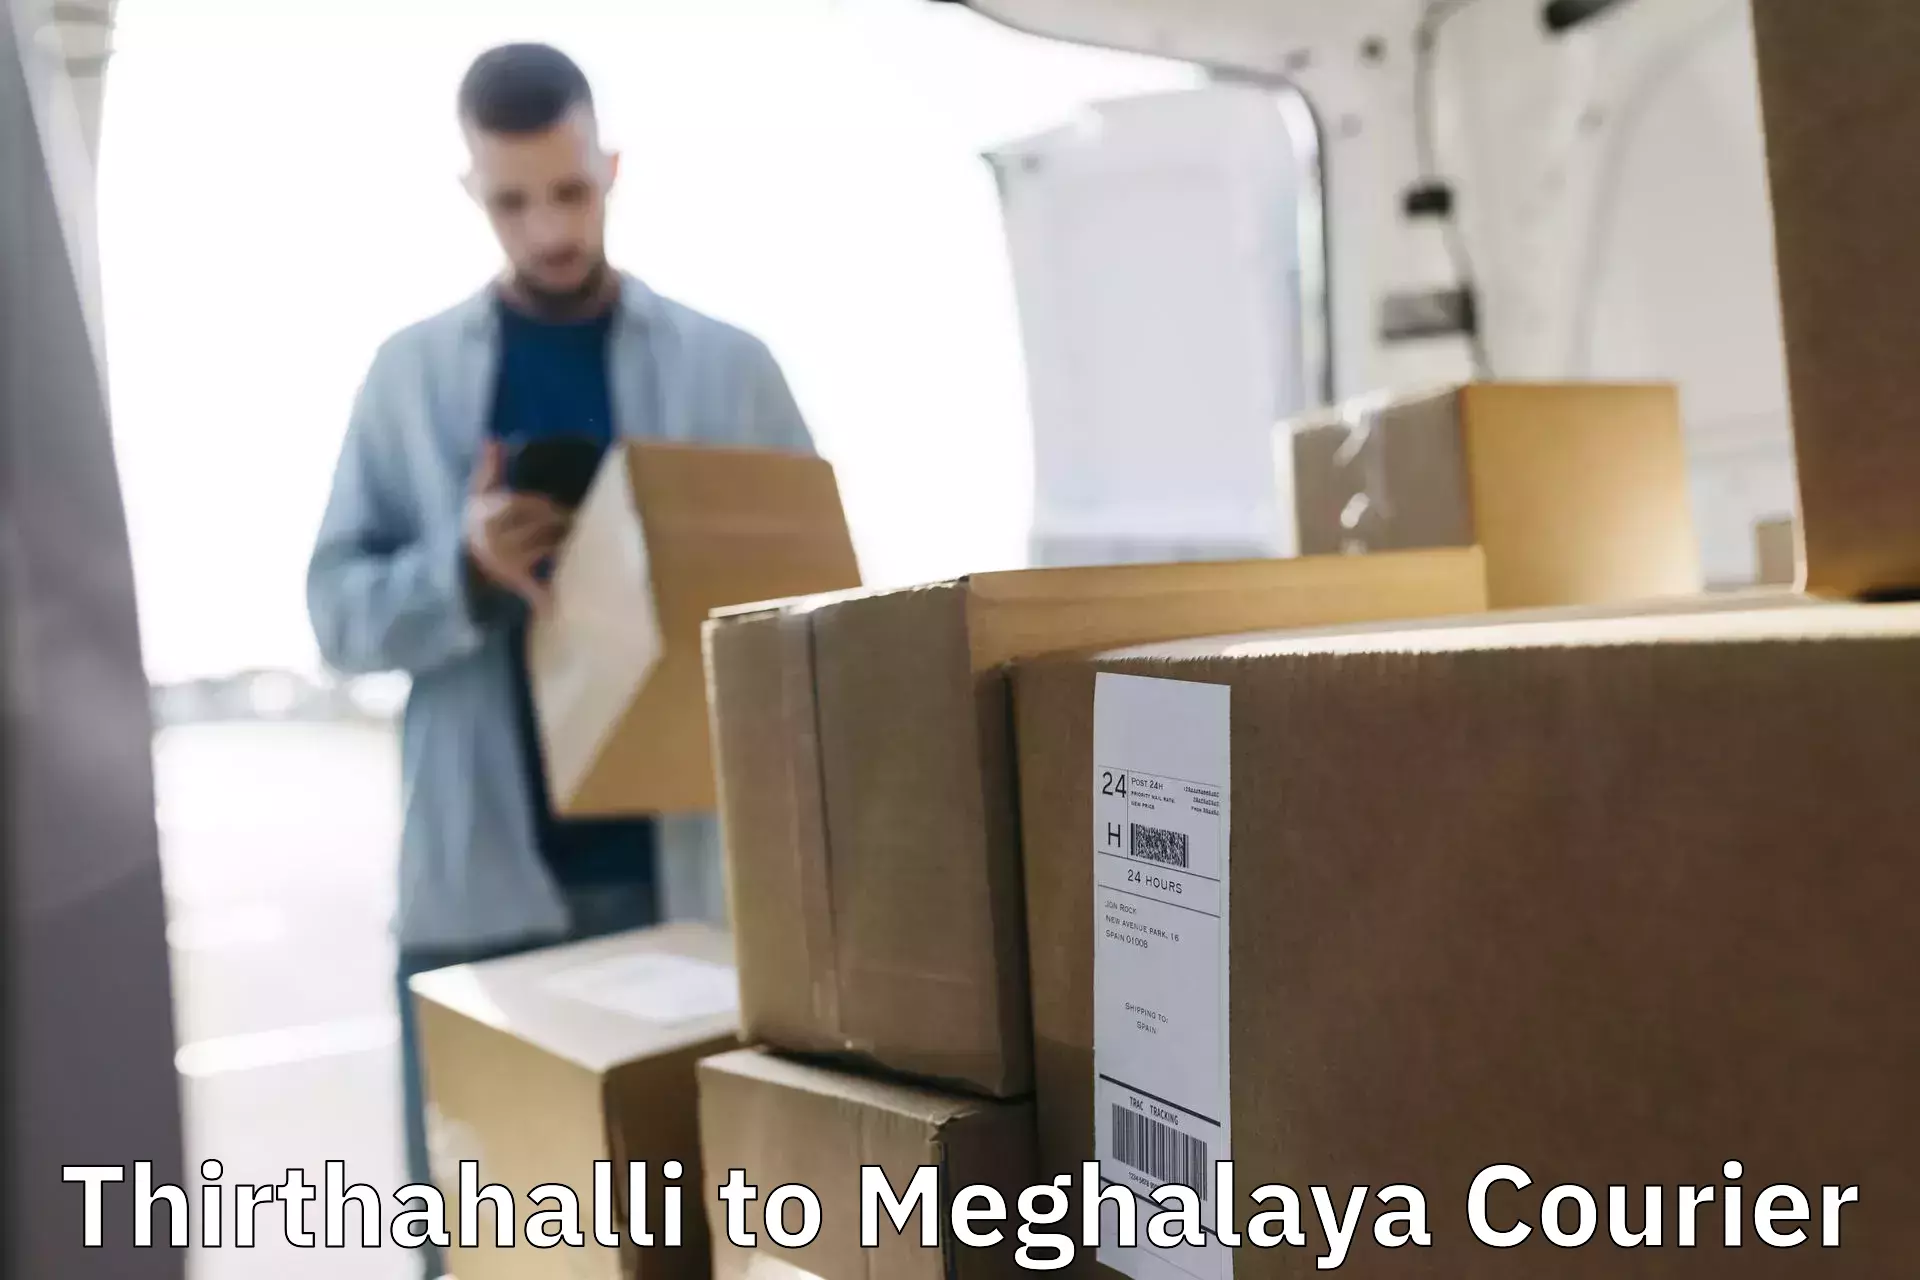 Courier service booking Thirthahalli to Shillong